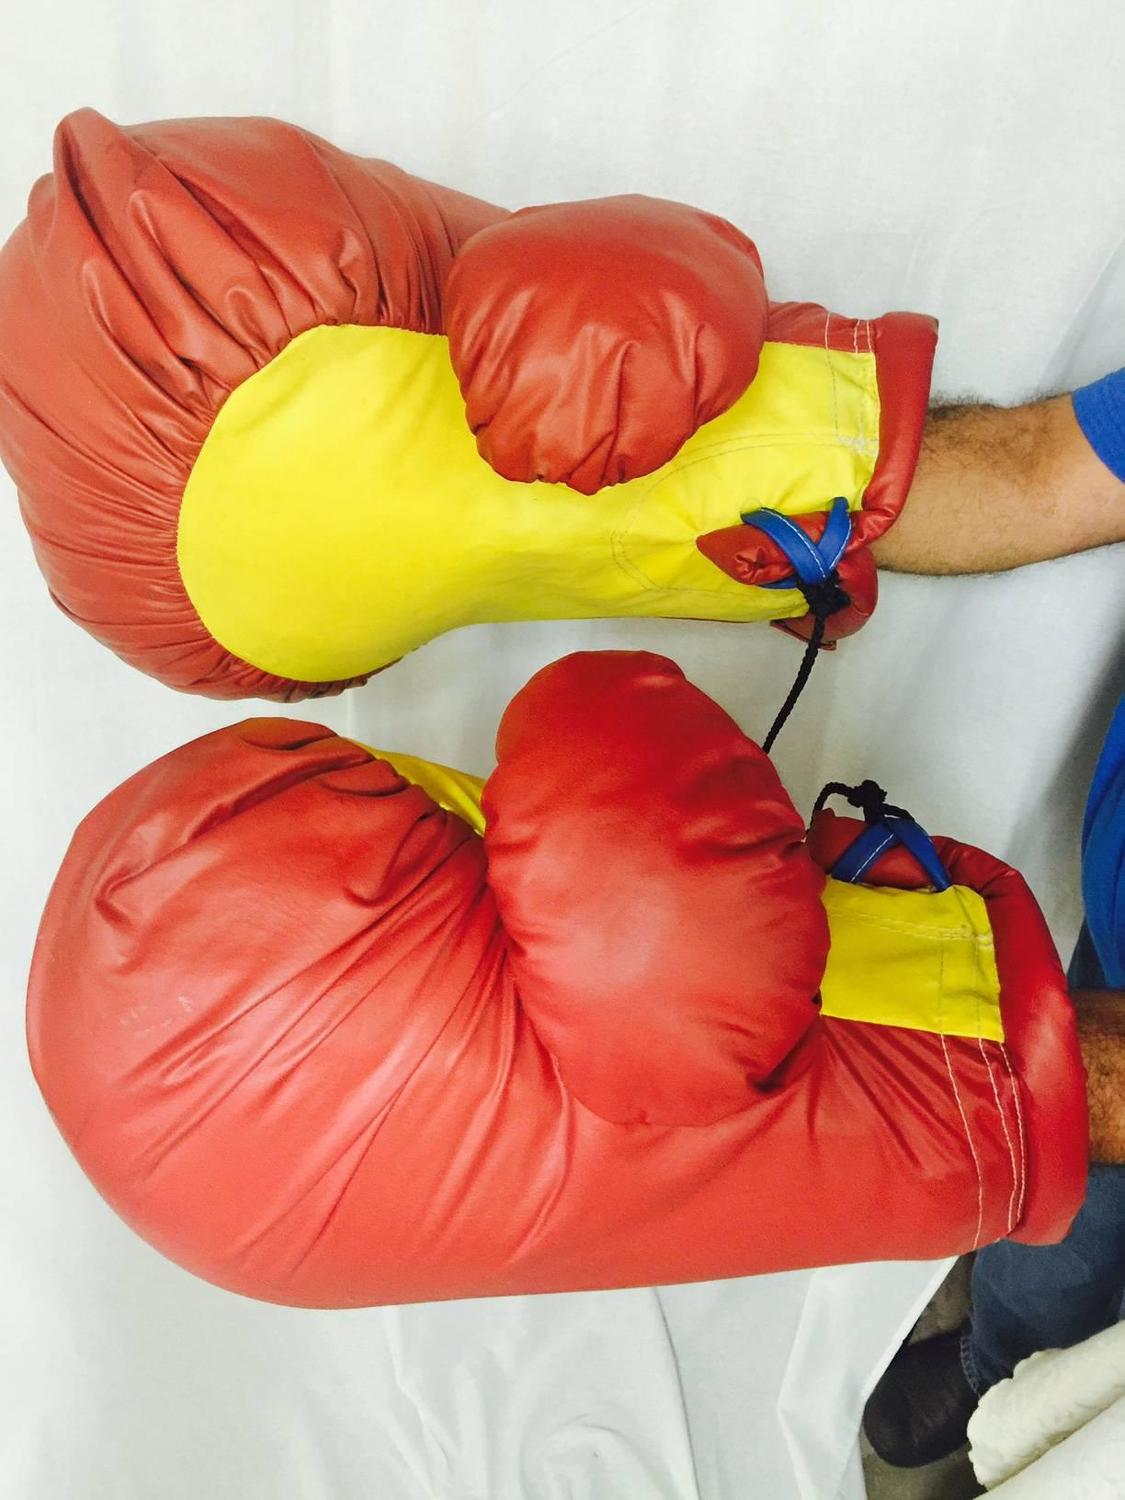 Unique Pair of Vintage Oversized Boxing Gloves For Sale at 1stdibs